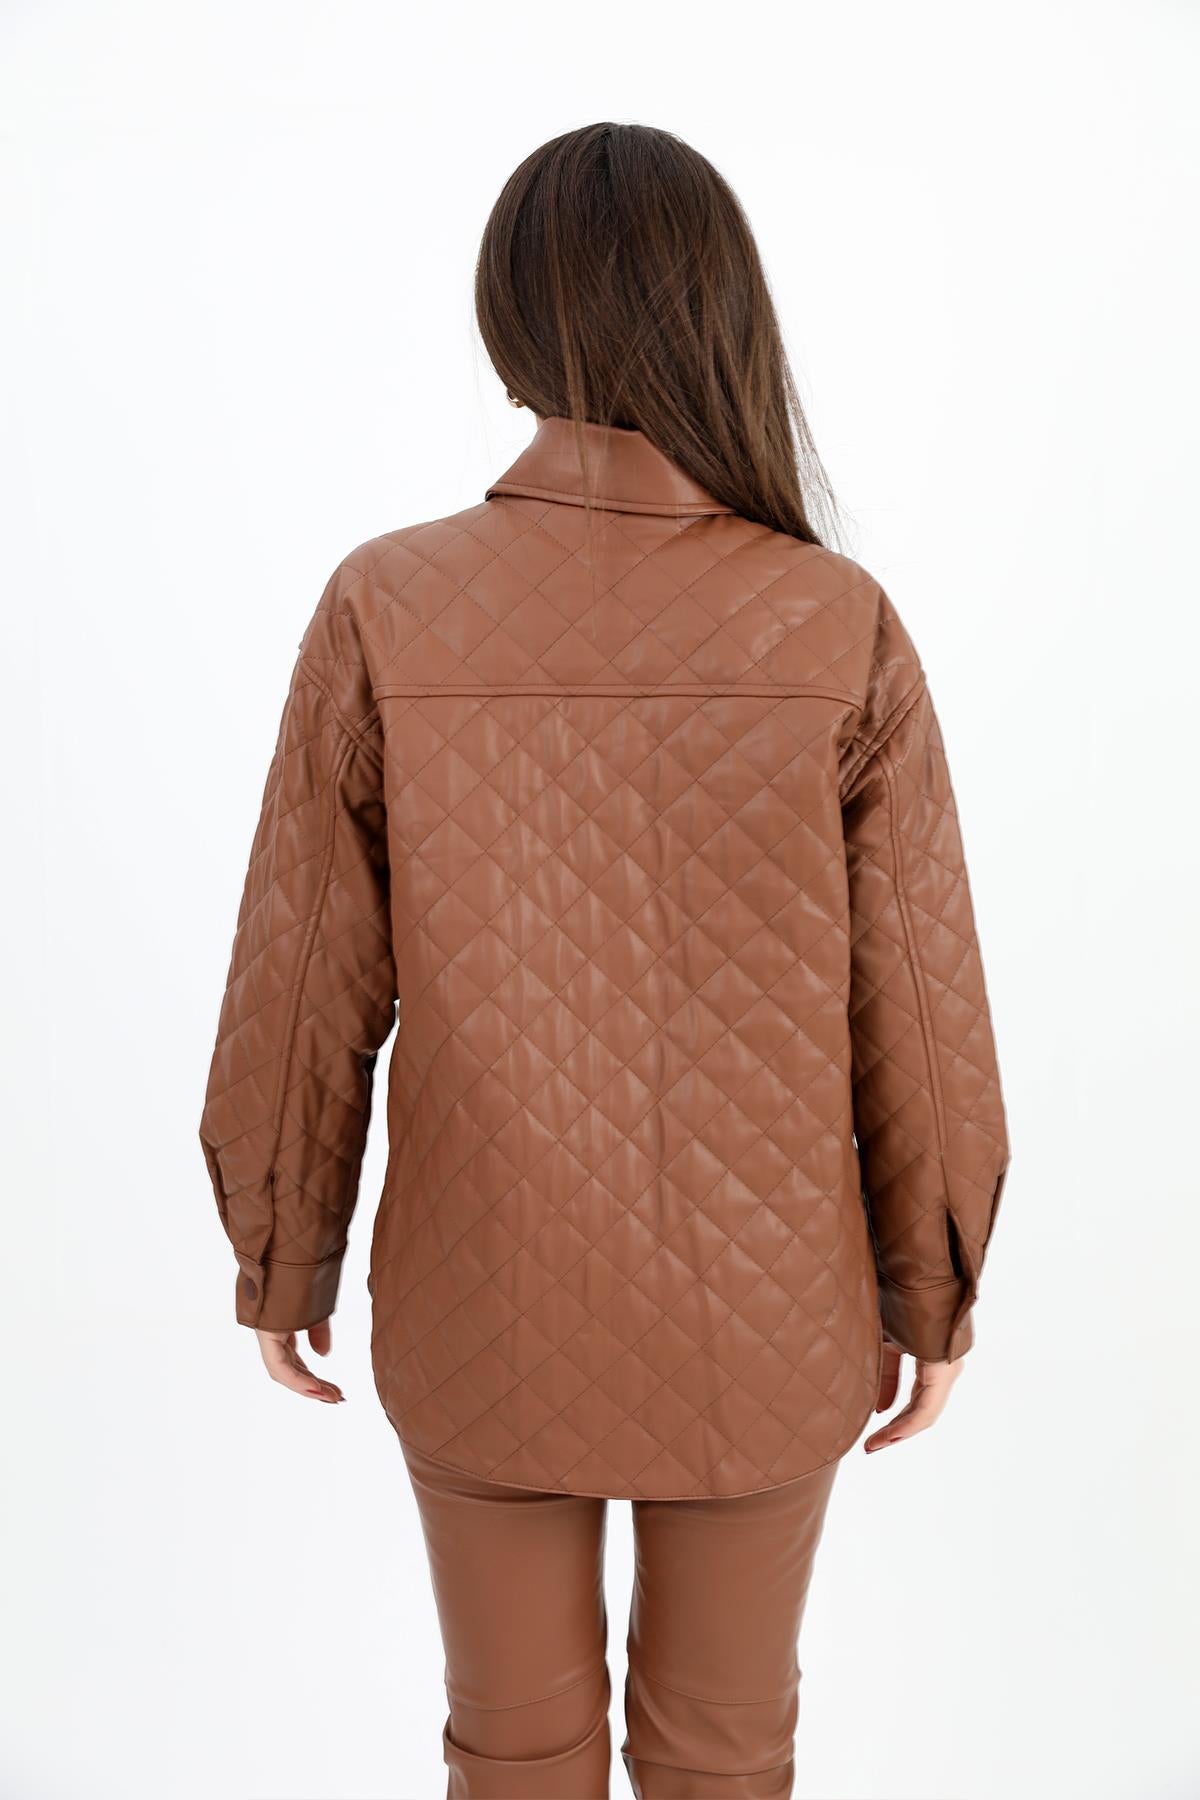 Women's Leather Coat with Pocket Flap Quilted - Brown - STREETMODE ™